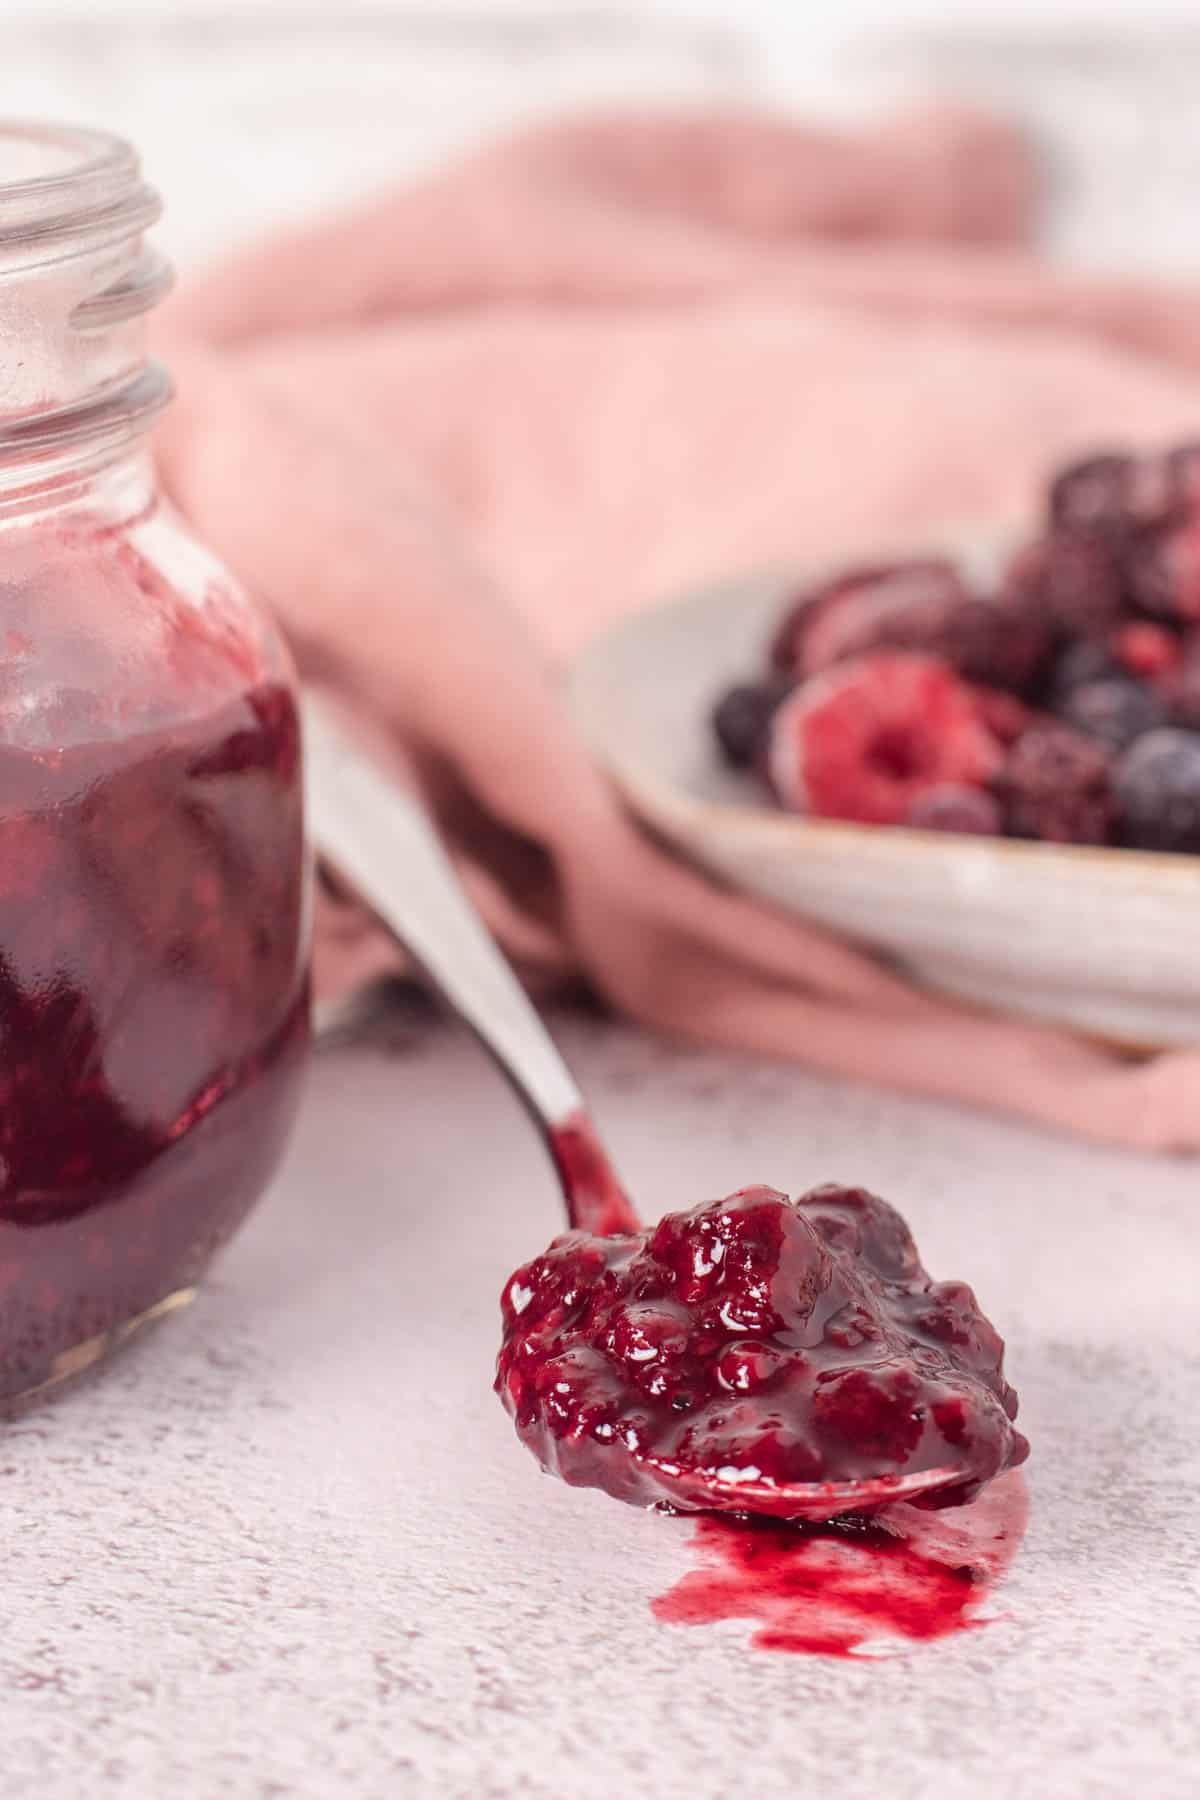 Spoonful of berry compote on the counter, showing consistency - jar of compote and frozen berries in background